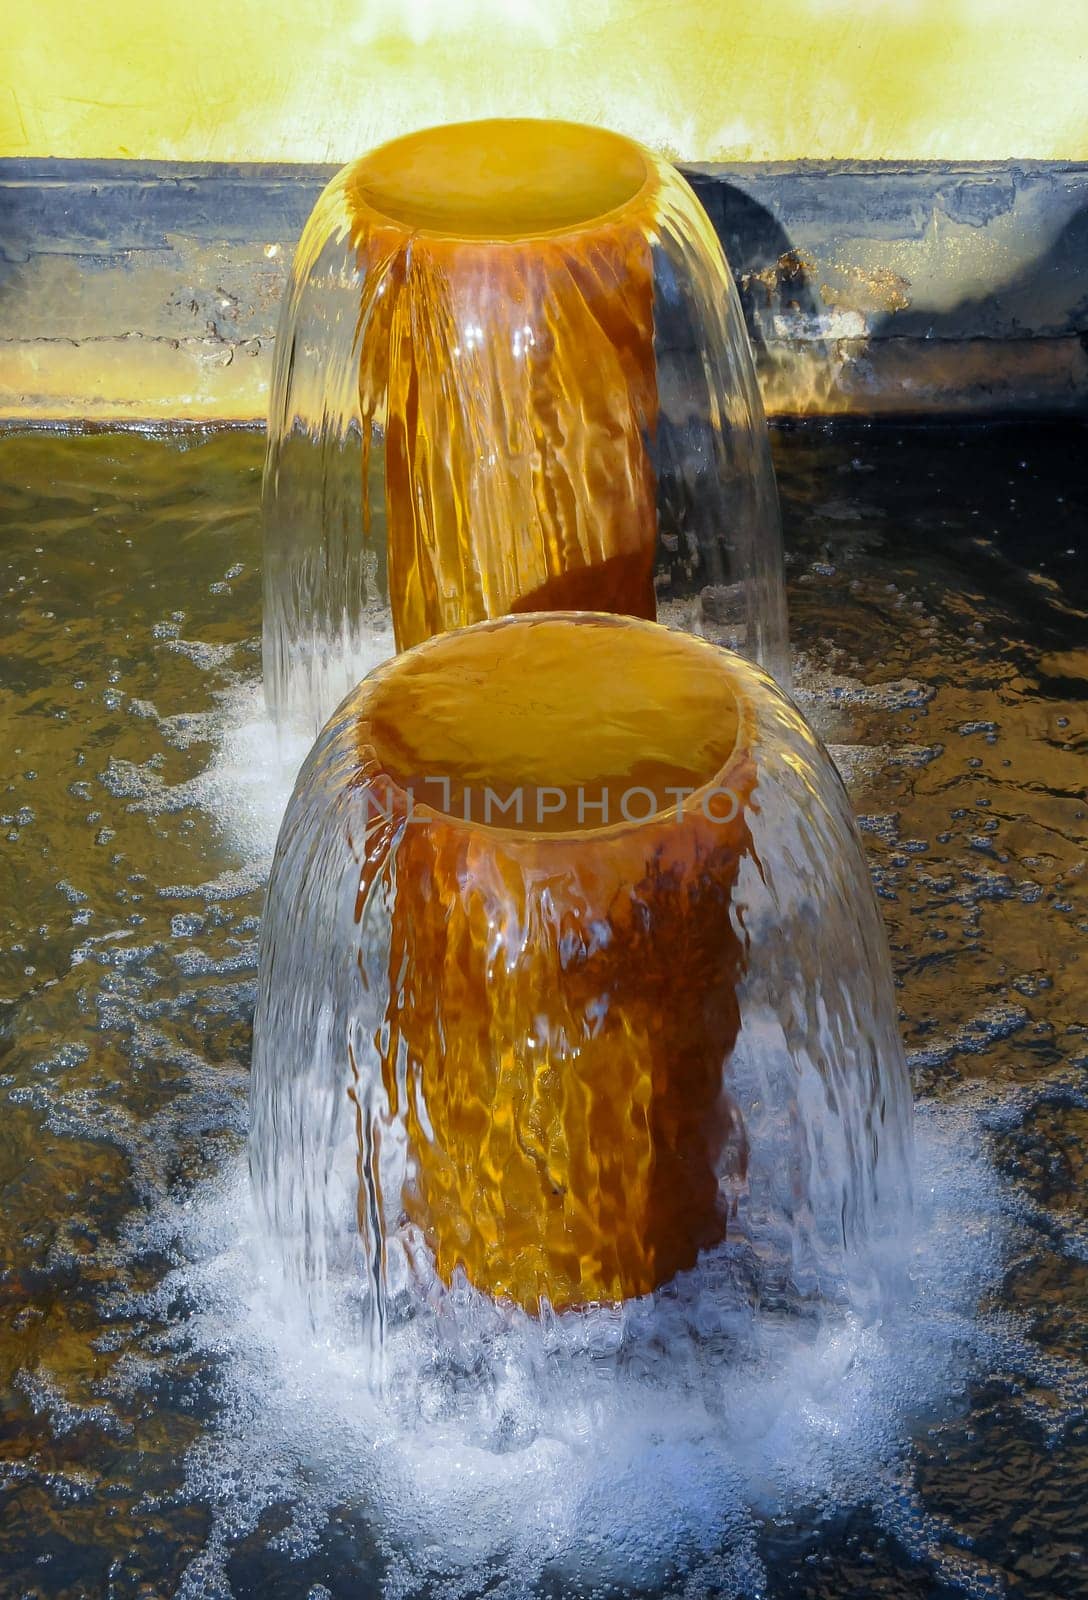 Original fountain, water pouring upward from a pipe in a park in New Jersey by Hydrobiolog